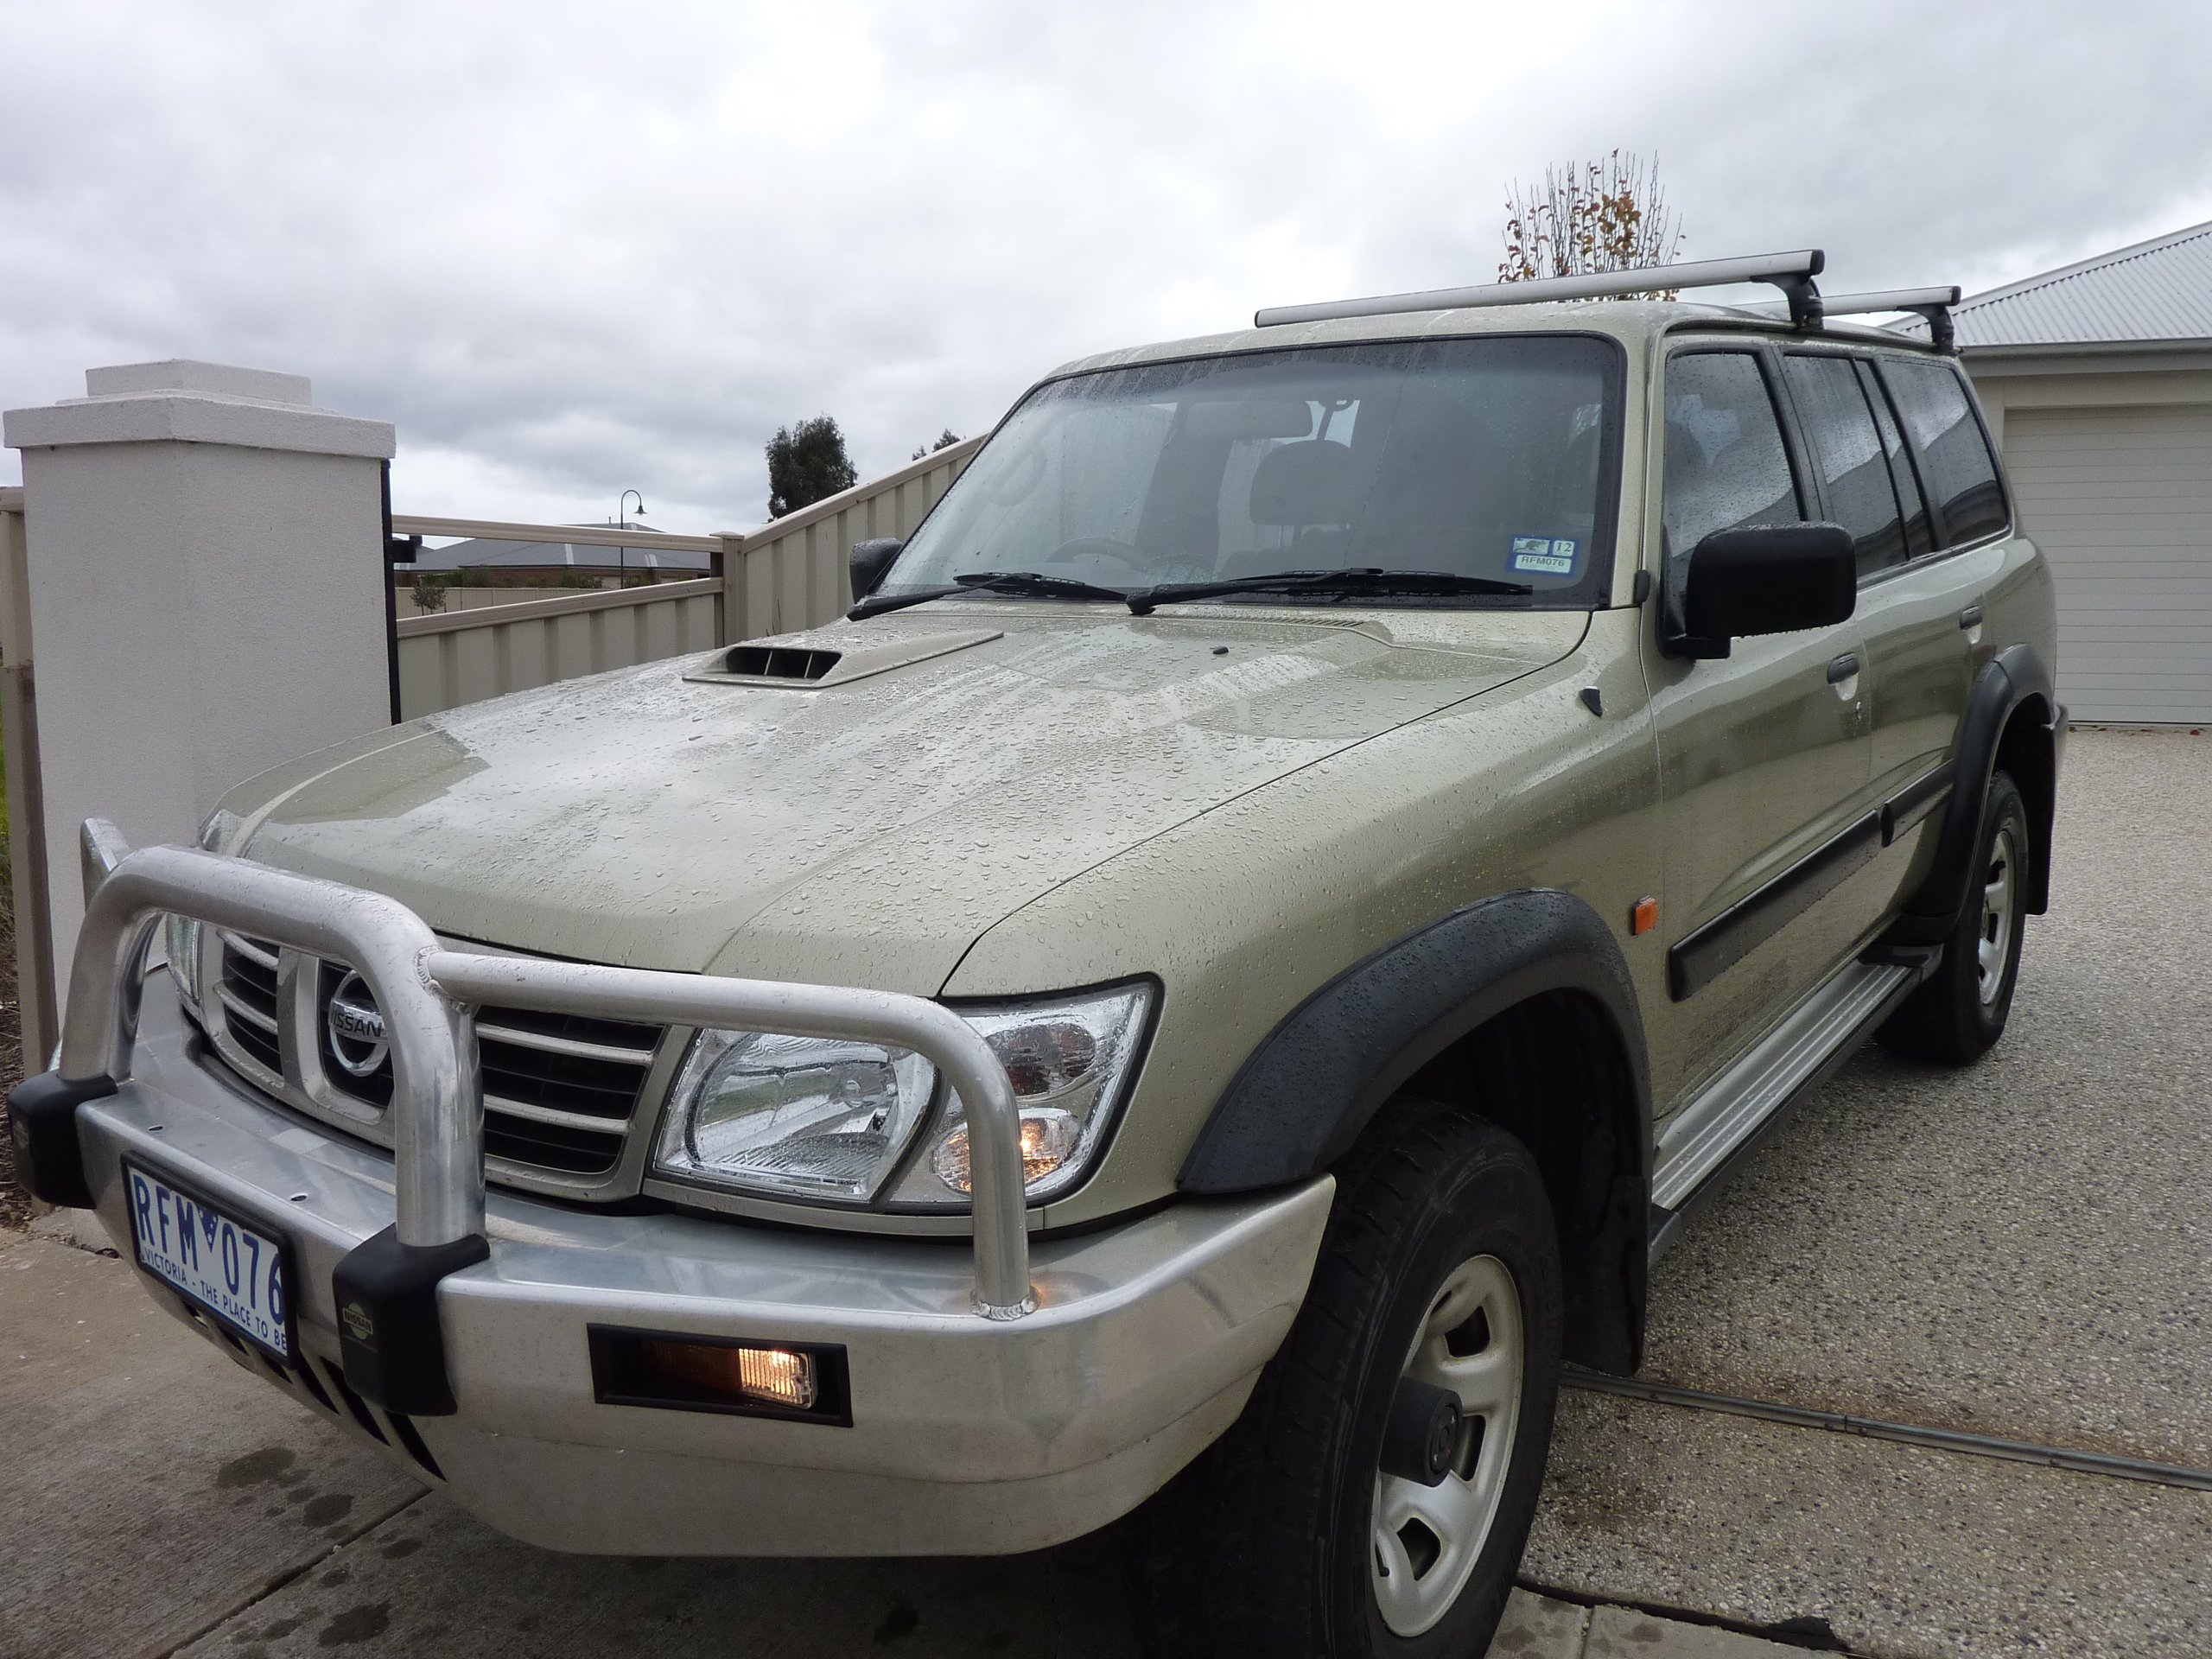 Nissan patrols for sale in victoria #5